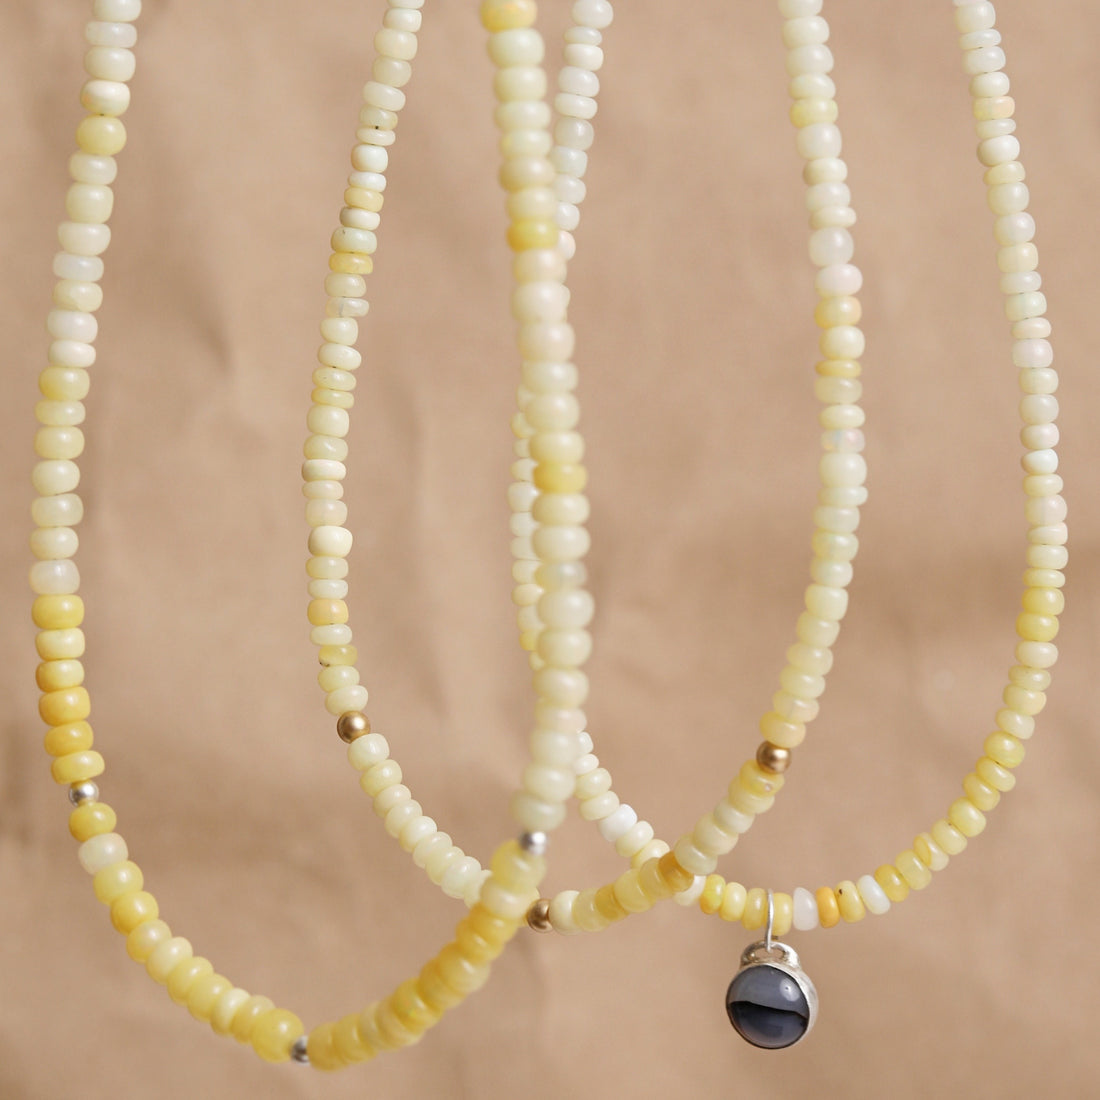 Sunshowers Opal and Dendritic Agate Necklace